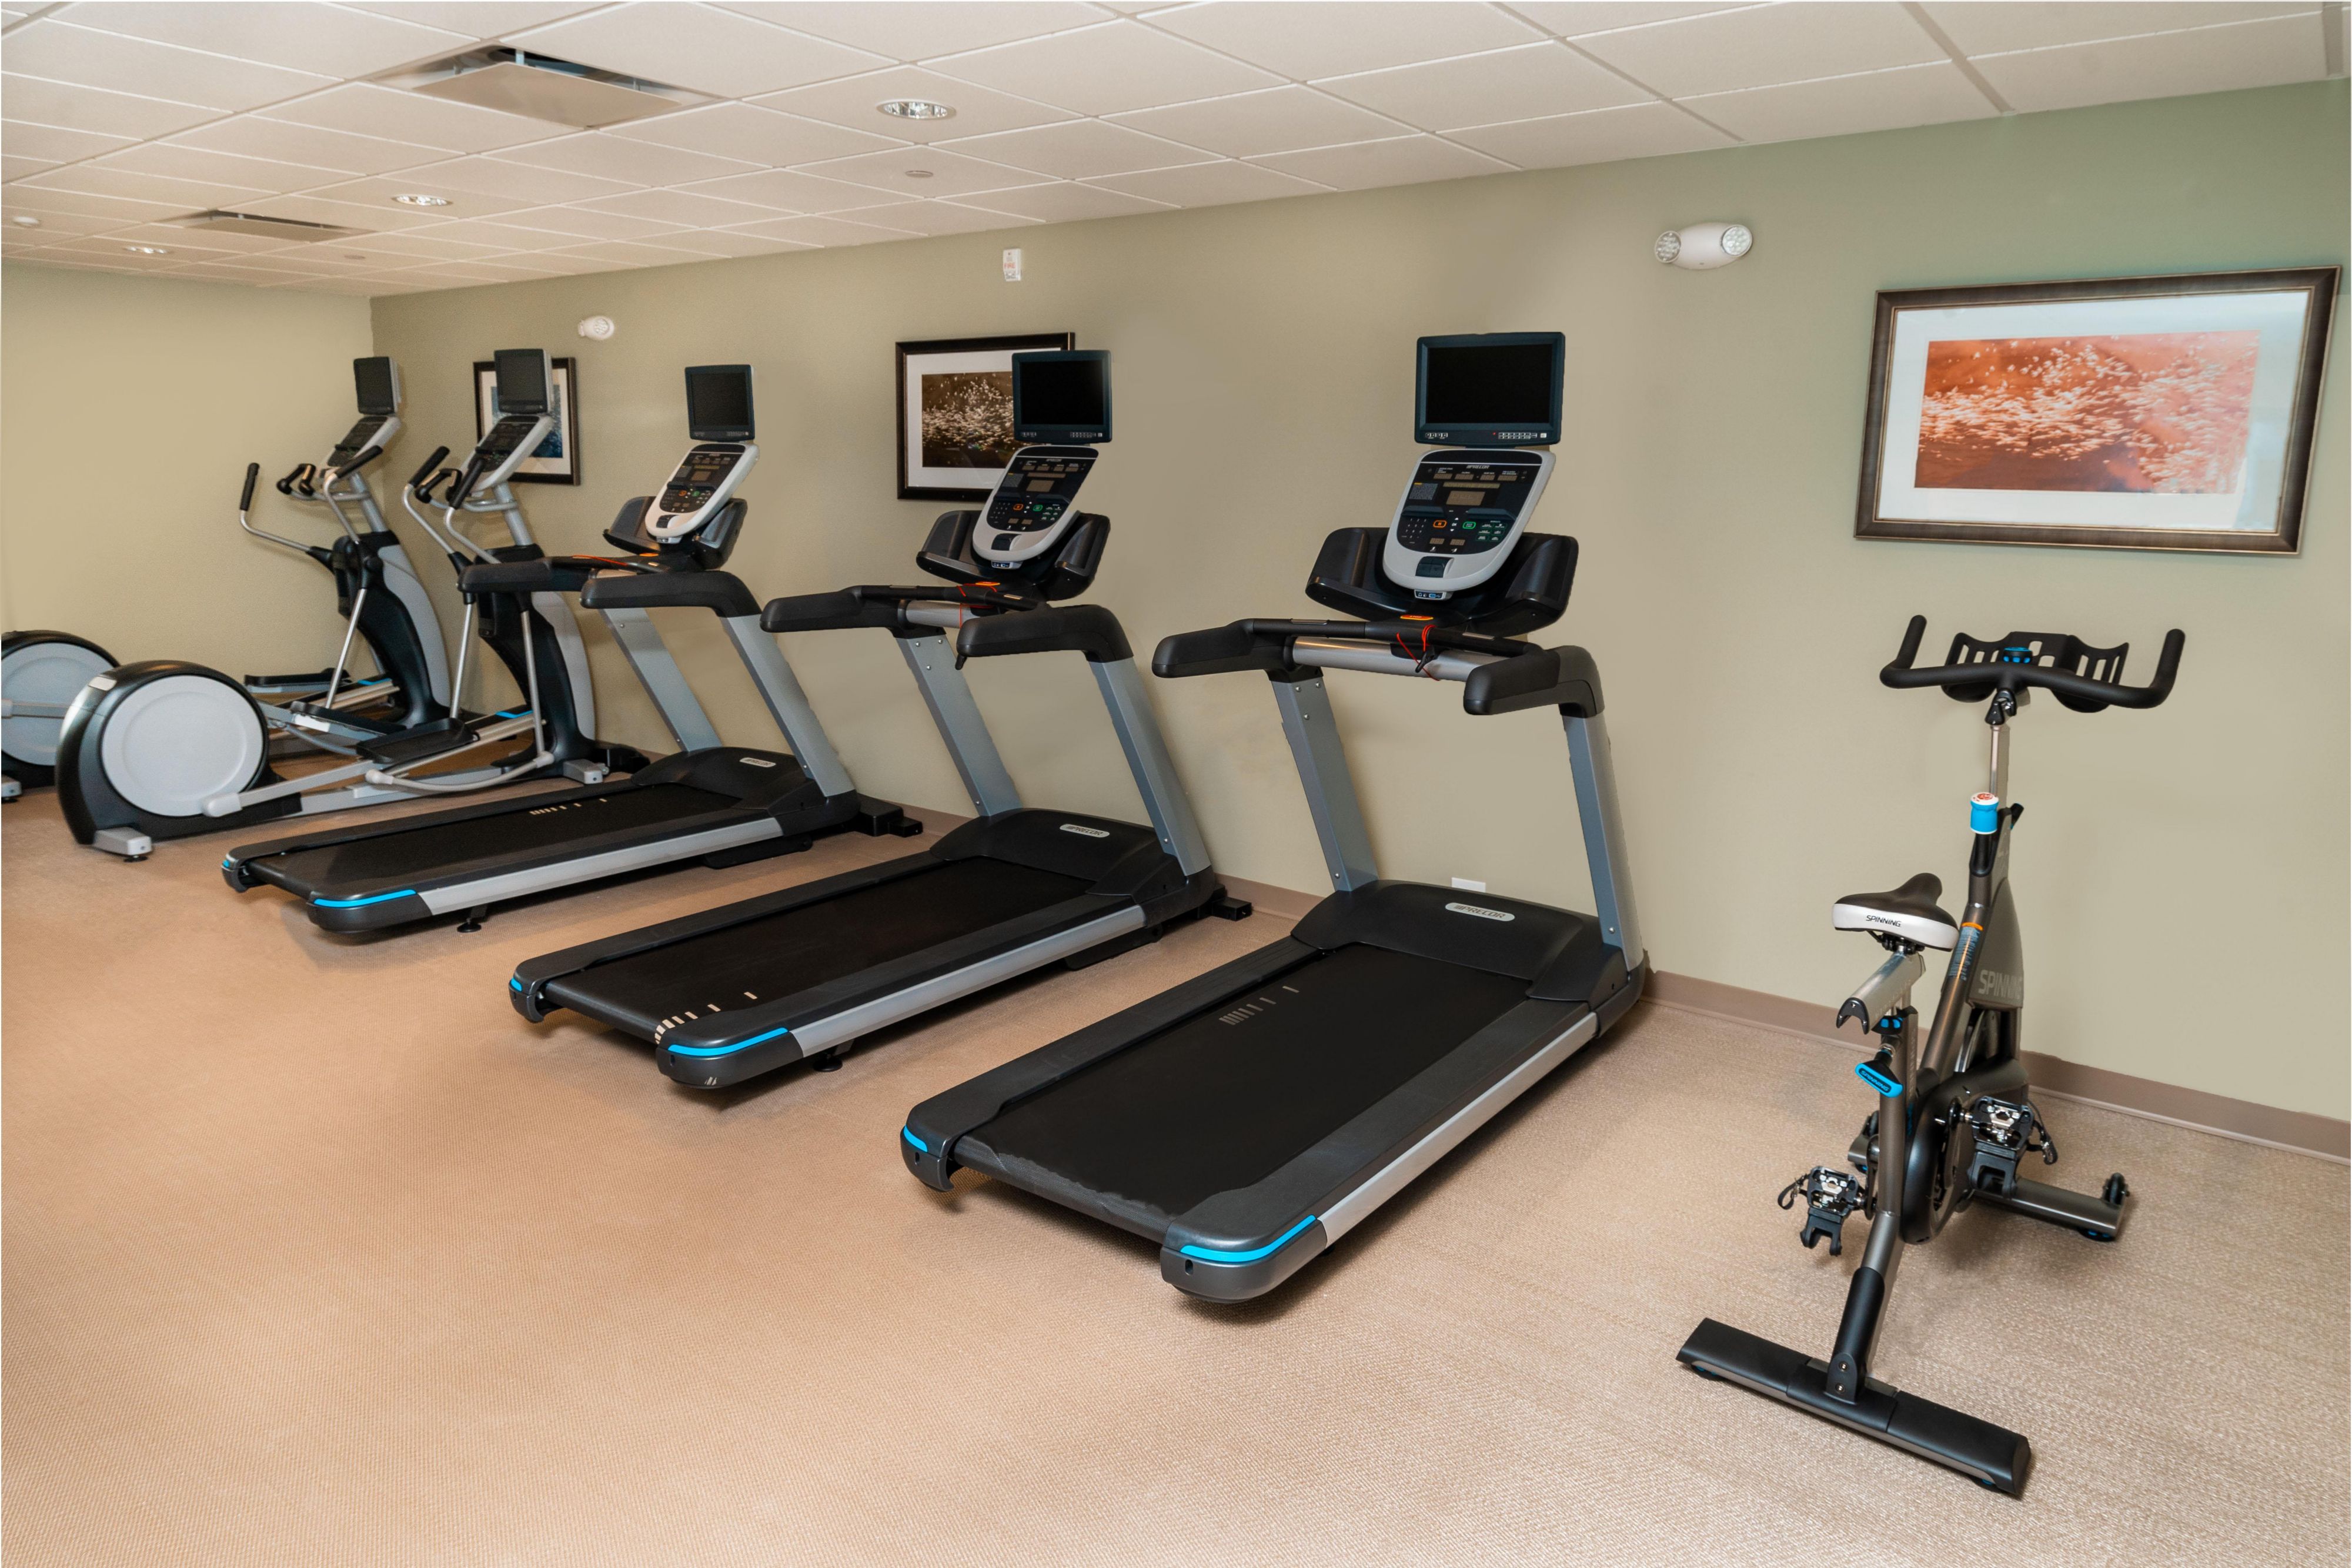 We know it's difficult to stay on track of our fitness goals while you are away from home. Our large state of the art fitness center makes things easy to ensure you never skip a workout.